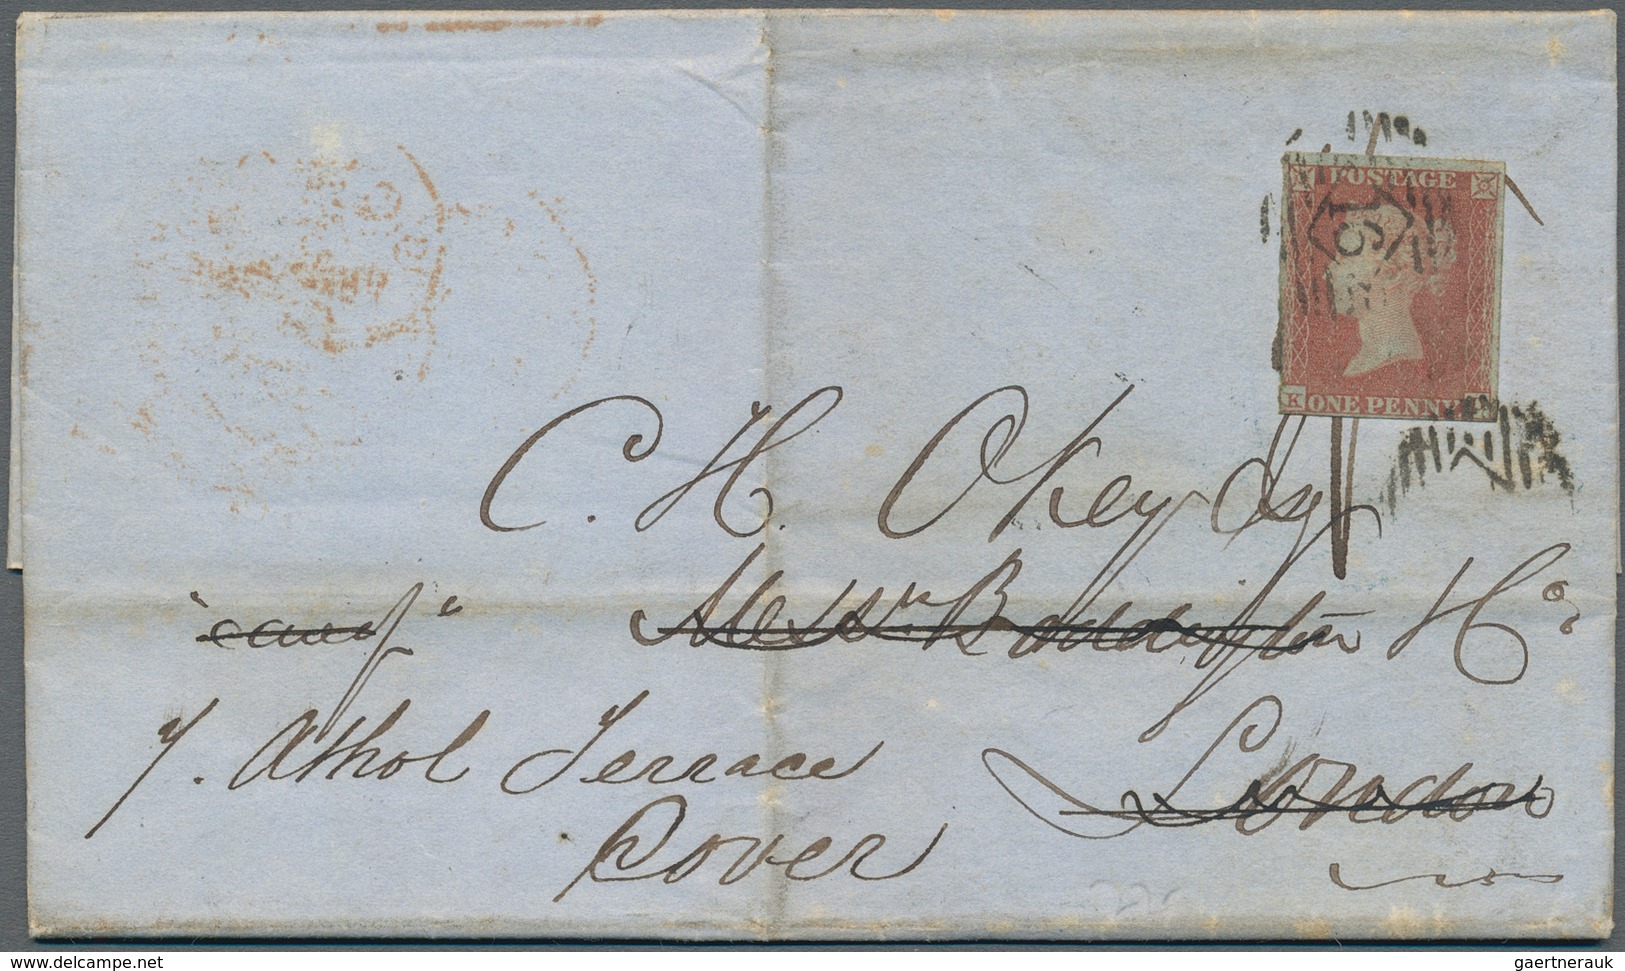 Antigua: 1851, Complete Entire Letter Sent From "ANTIQUA DE 16 1851" To London With Arrival 8.1.52, - Antigua And Barbuda (1981-...)